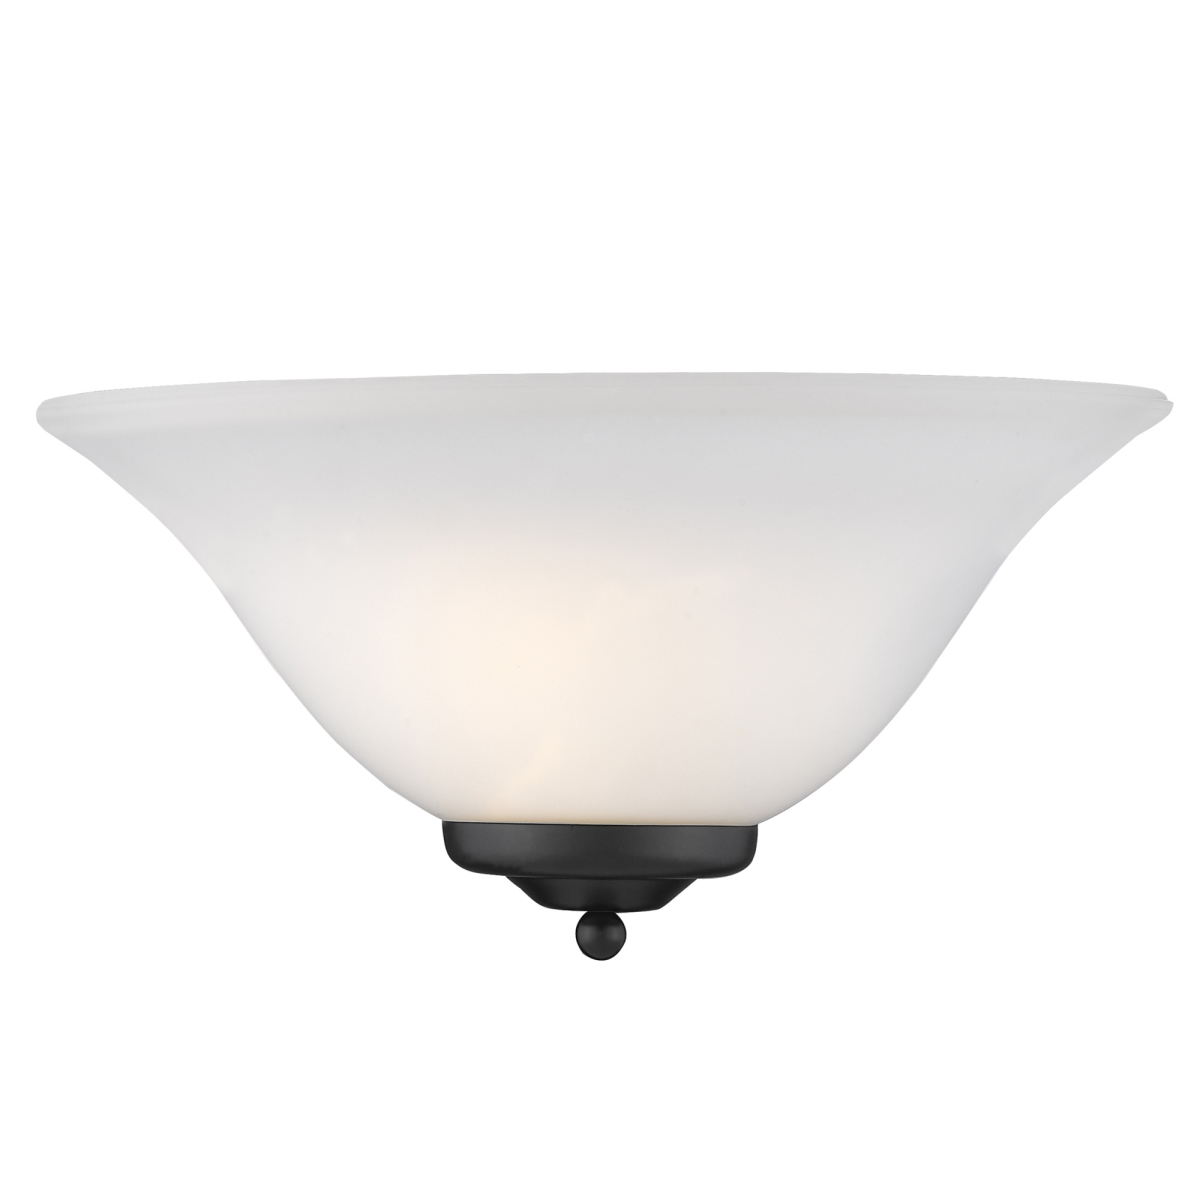 Picture of Golden Lighting 8355 BLK 13 in. Multi-Family 1 Light Matte Black Wall Sconce Wall Light with Opal Glass